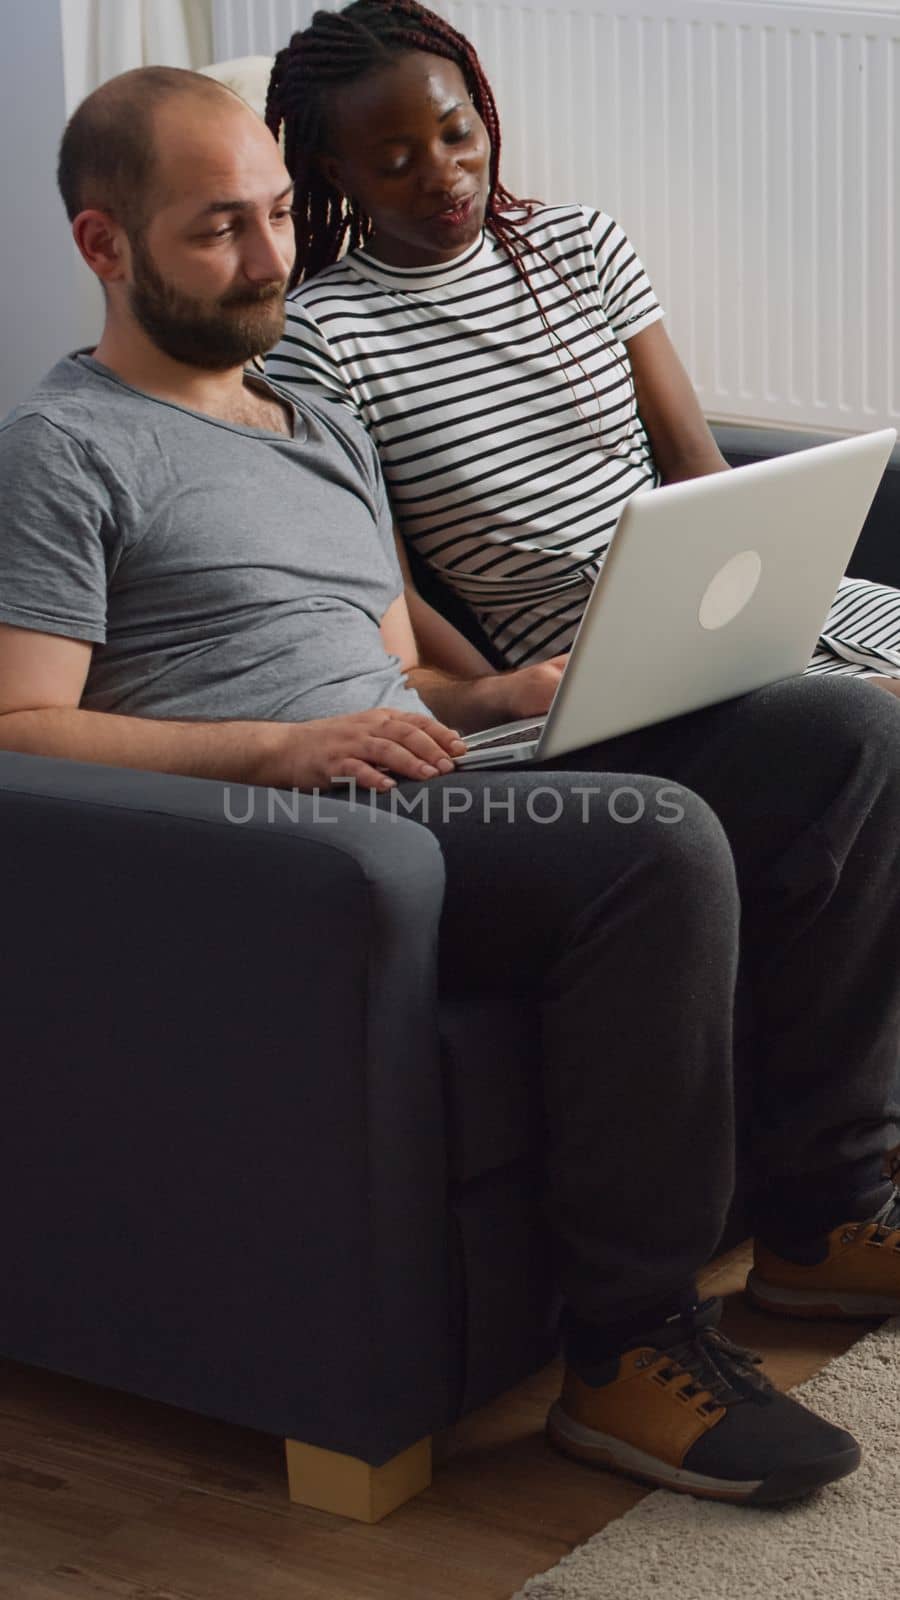 Modern interracial couple waving on video call conference by DCStudio